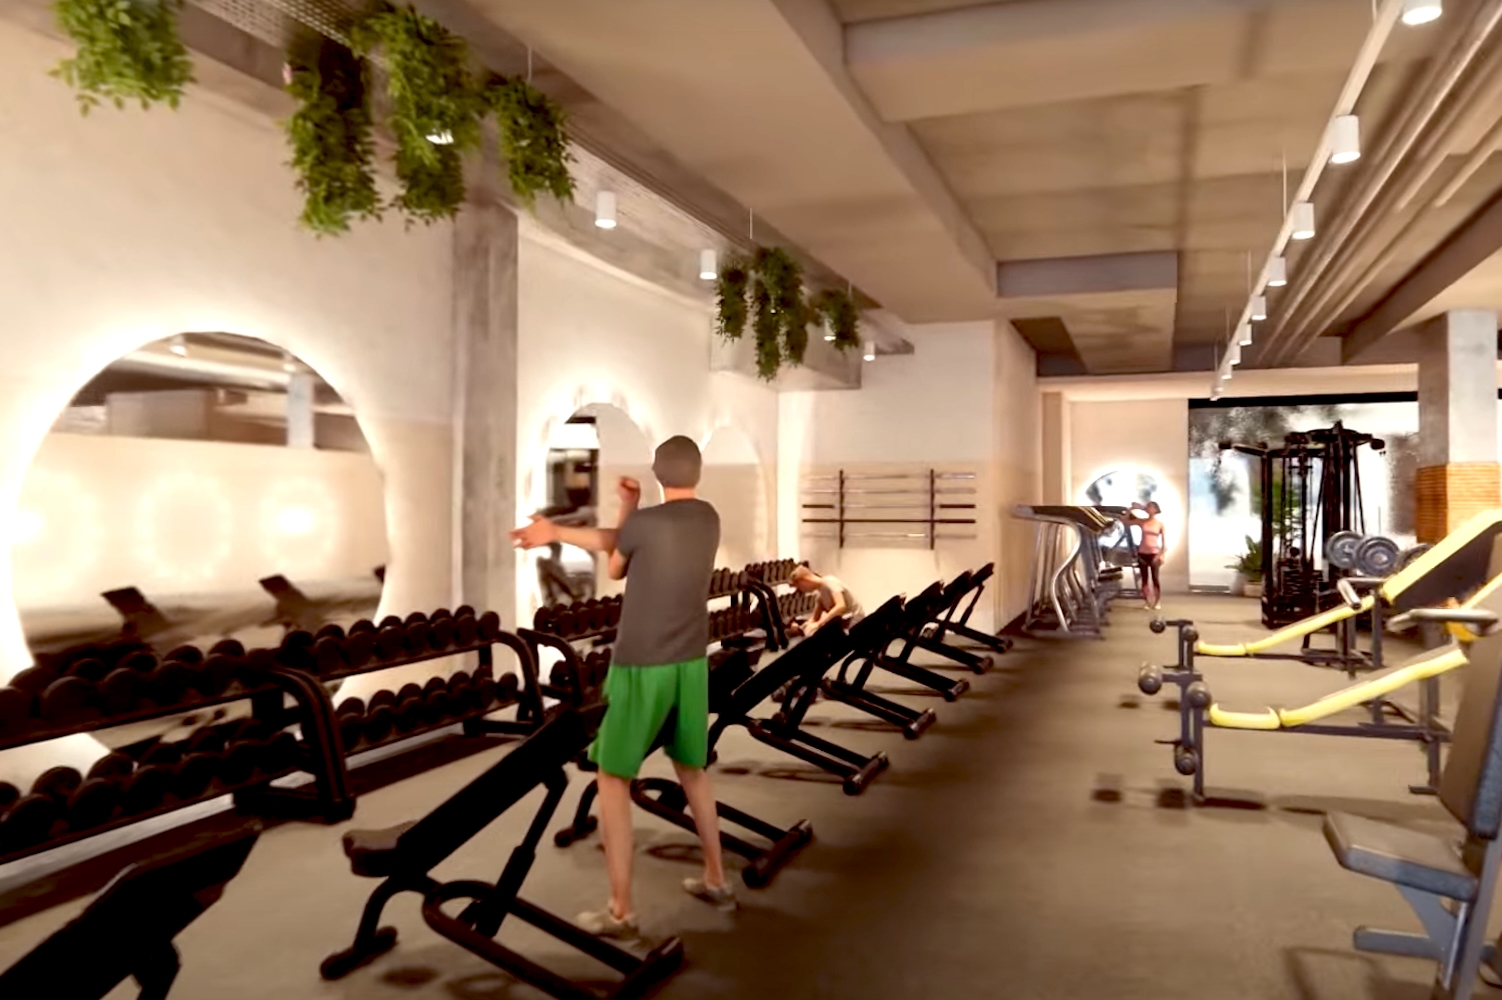 State Of The Art Gym Set To Open In Bondi This Winter [Video]